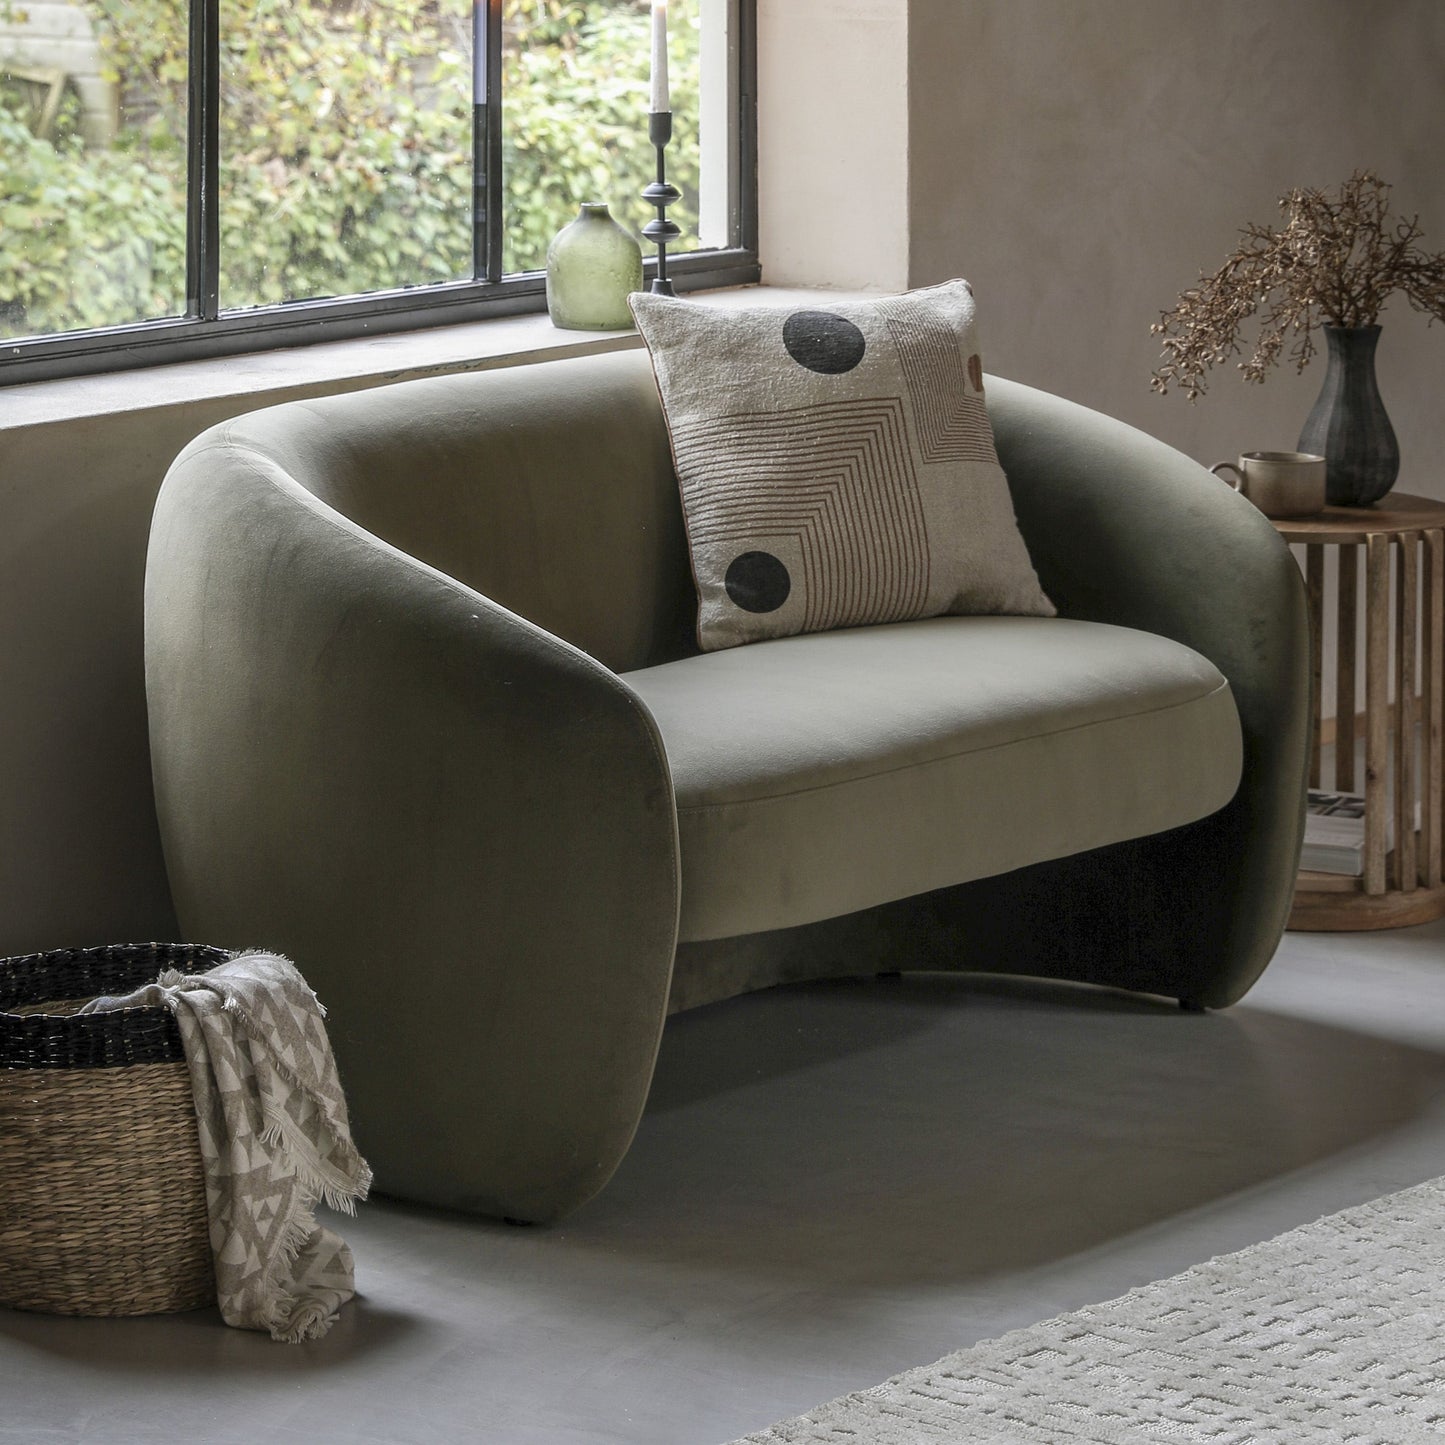 Aoife 2 Seater Sofa in Moss Green